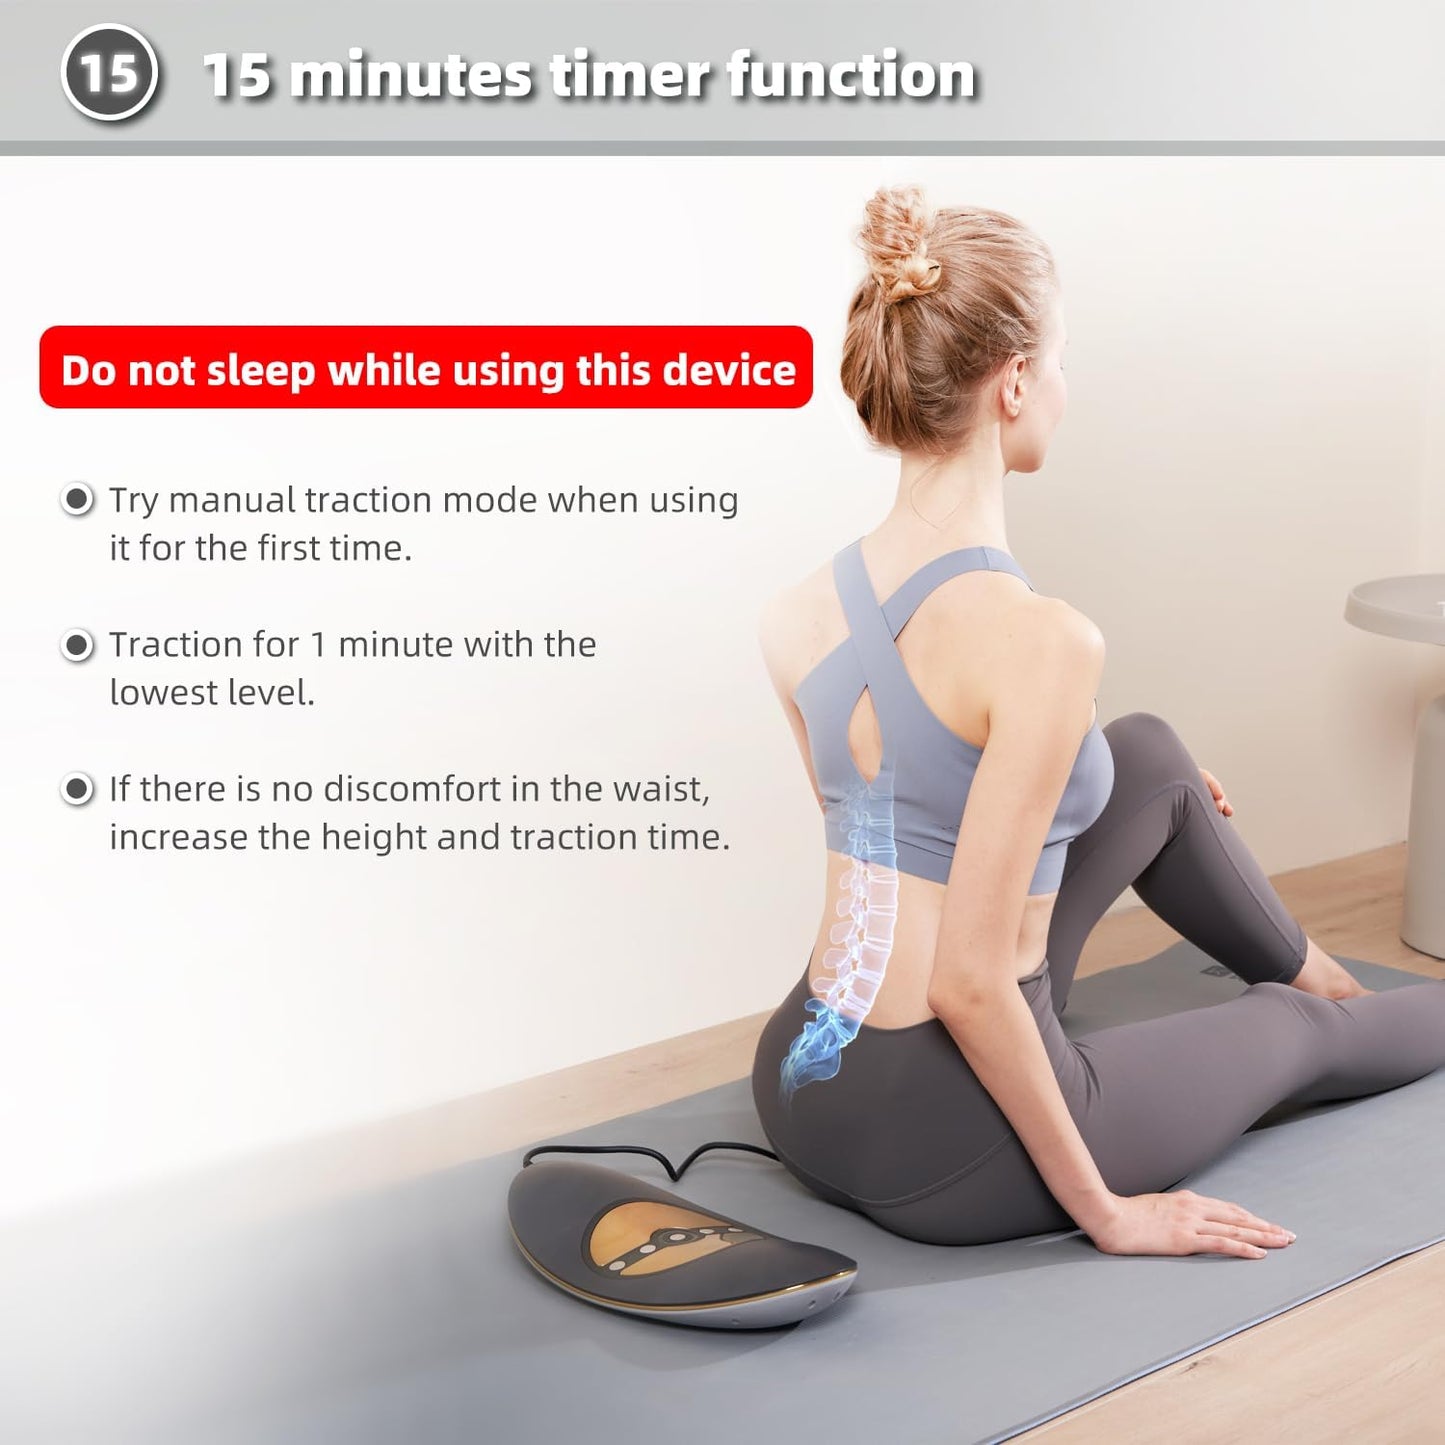 Electric Lumbar Traction Device with Dynamic Airbag Back Stretching